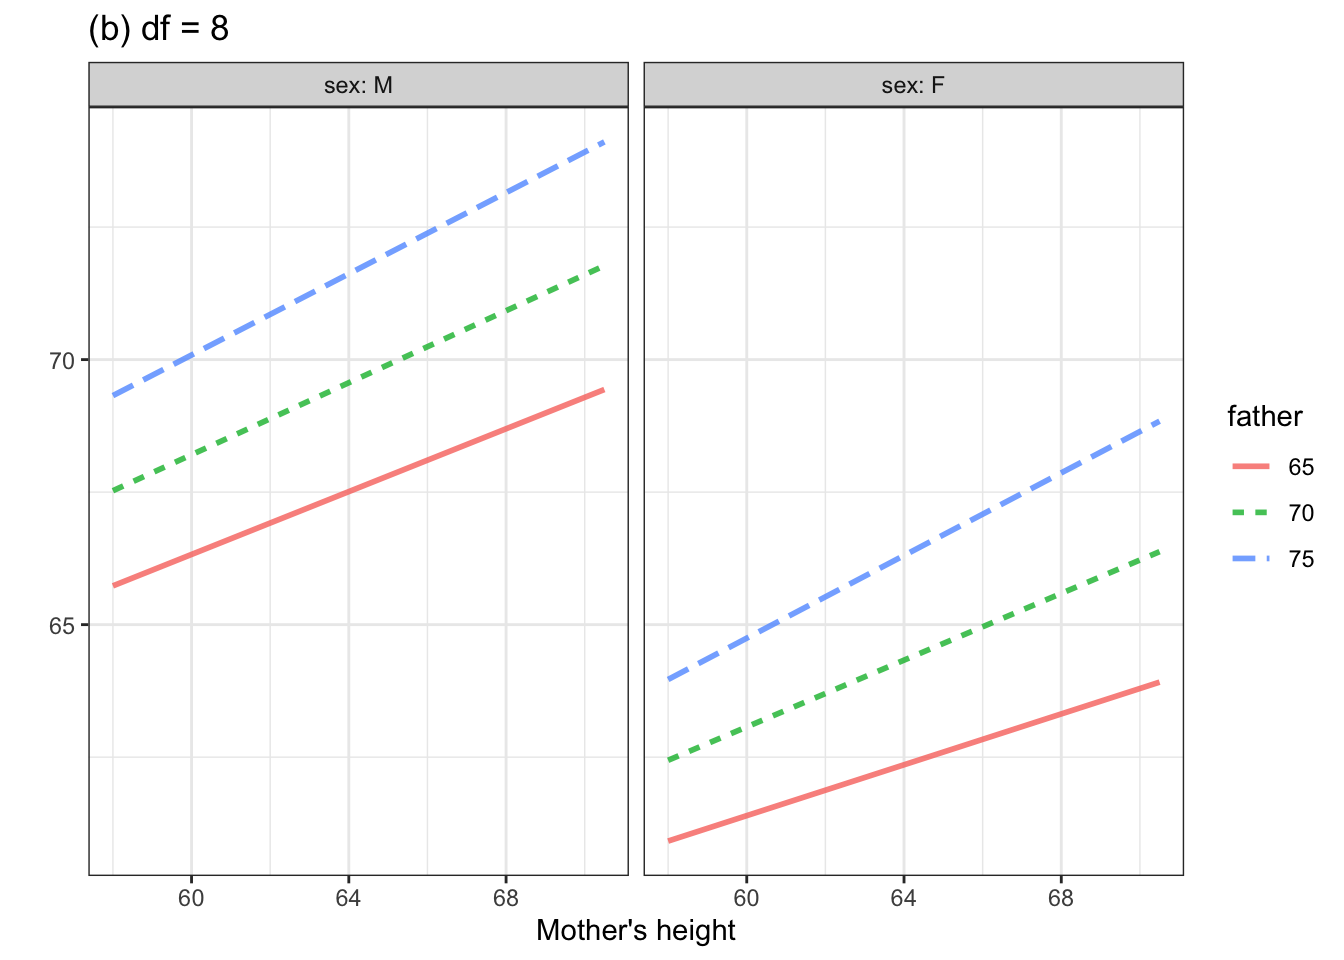 Figure 4. Two models of child’s height versus mother’s height. Father’s height and child’s sex are included as explanatory variables. Although father’s height is a quantitative variable, the graph shows the model for only three, evenly spaced, discrete values.